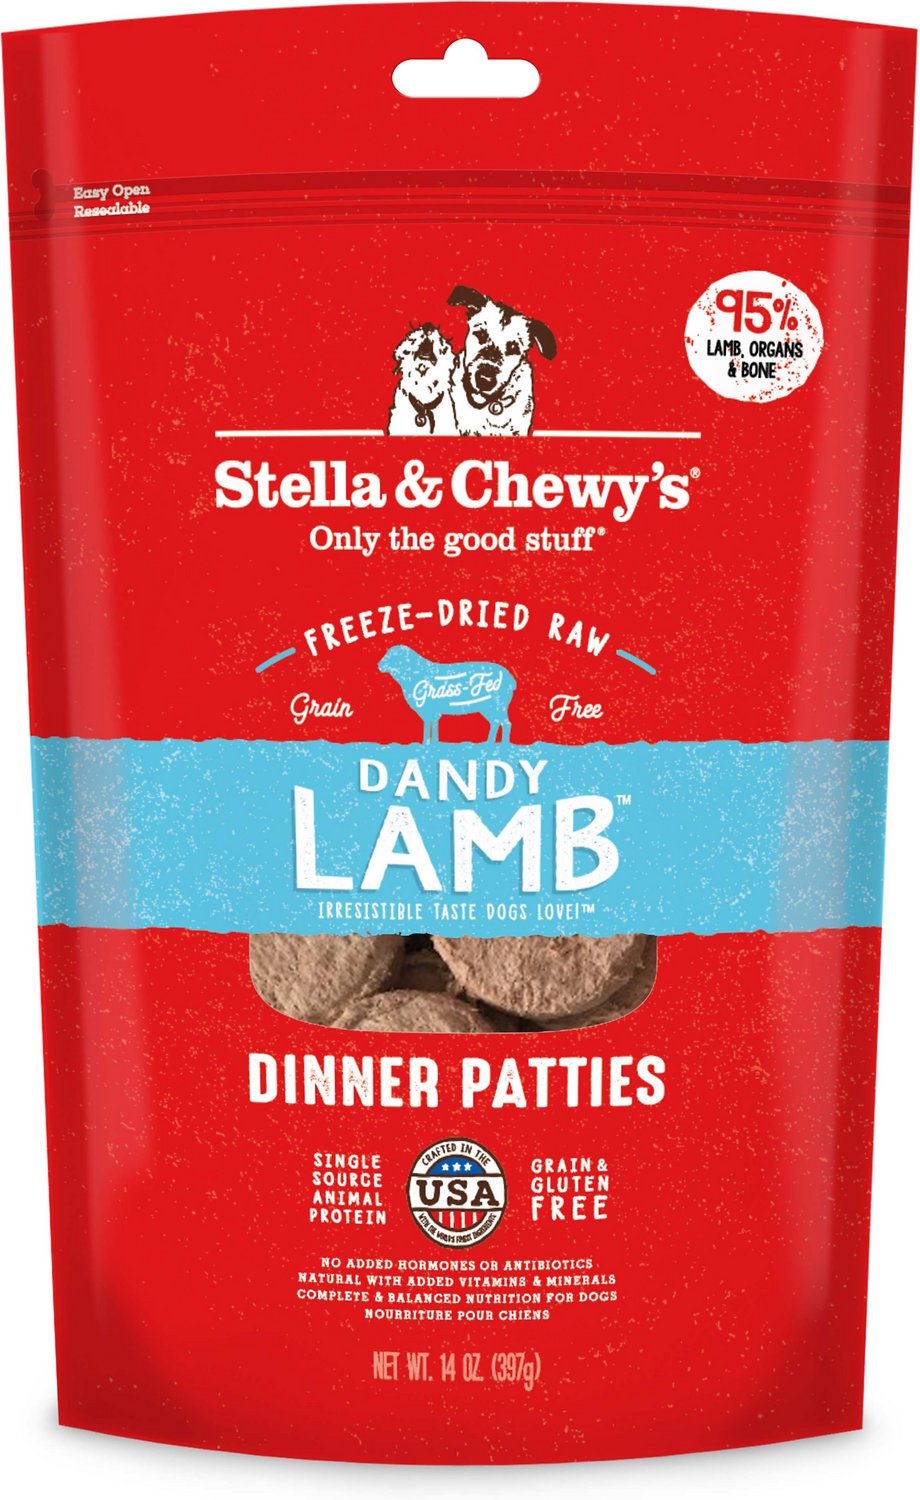 Stella & Chewy's - Dandy Lamb Dinner Patties Freeze-Dried Raw Dog Food - ARMOR THE POOCH